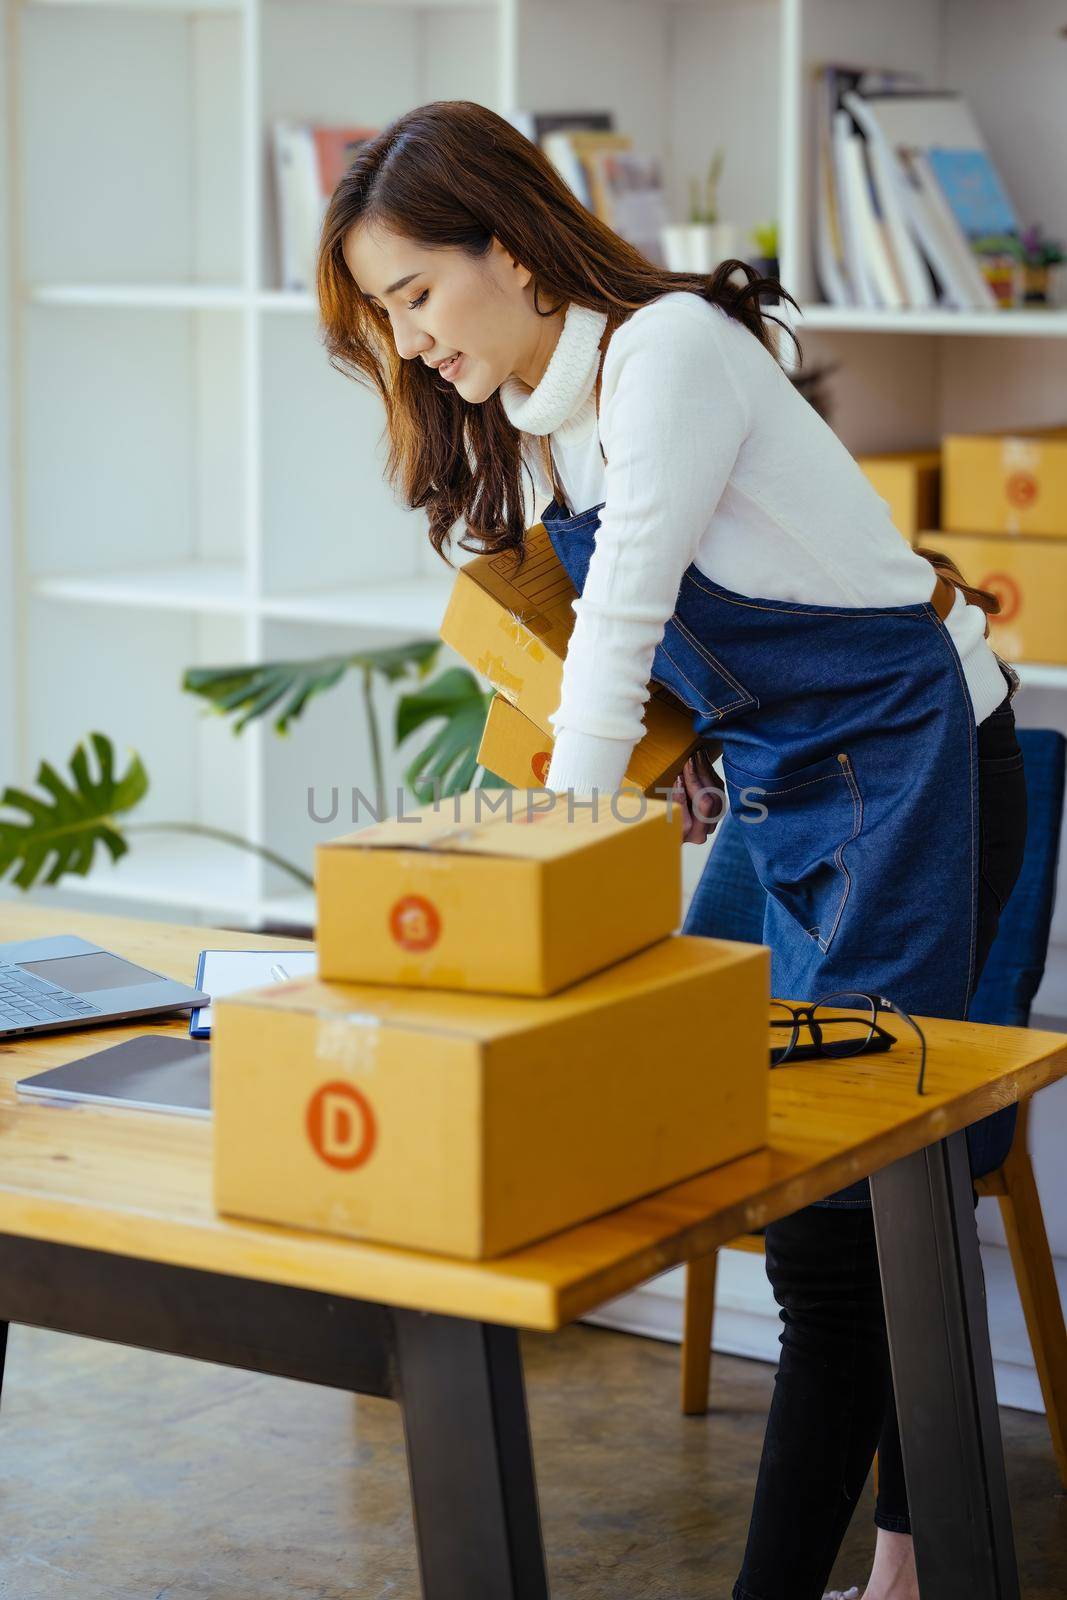 Work from home. happy women selling products online Startup small business owners are picking up parcel boxes to pack customer orders and prepare them for postage